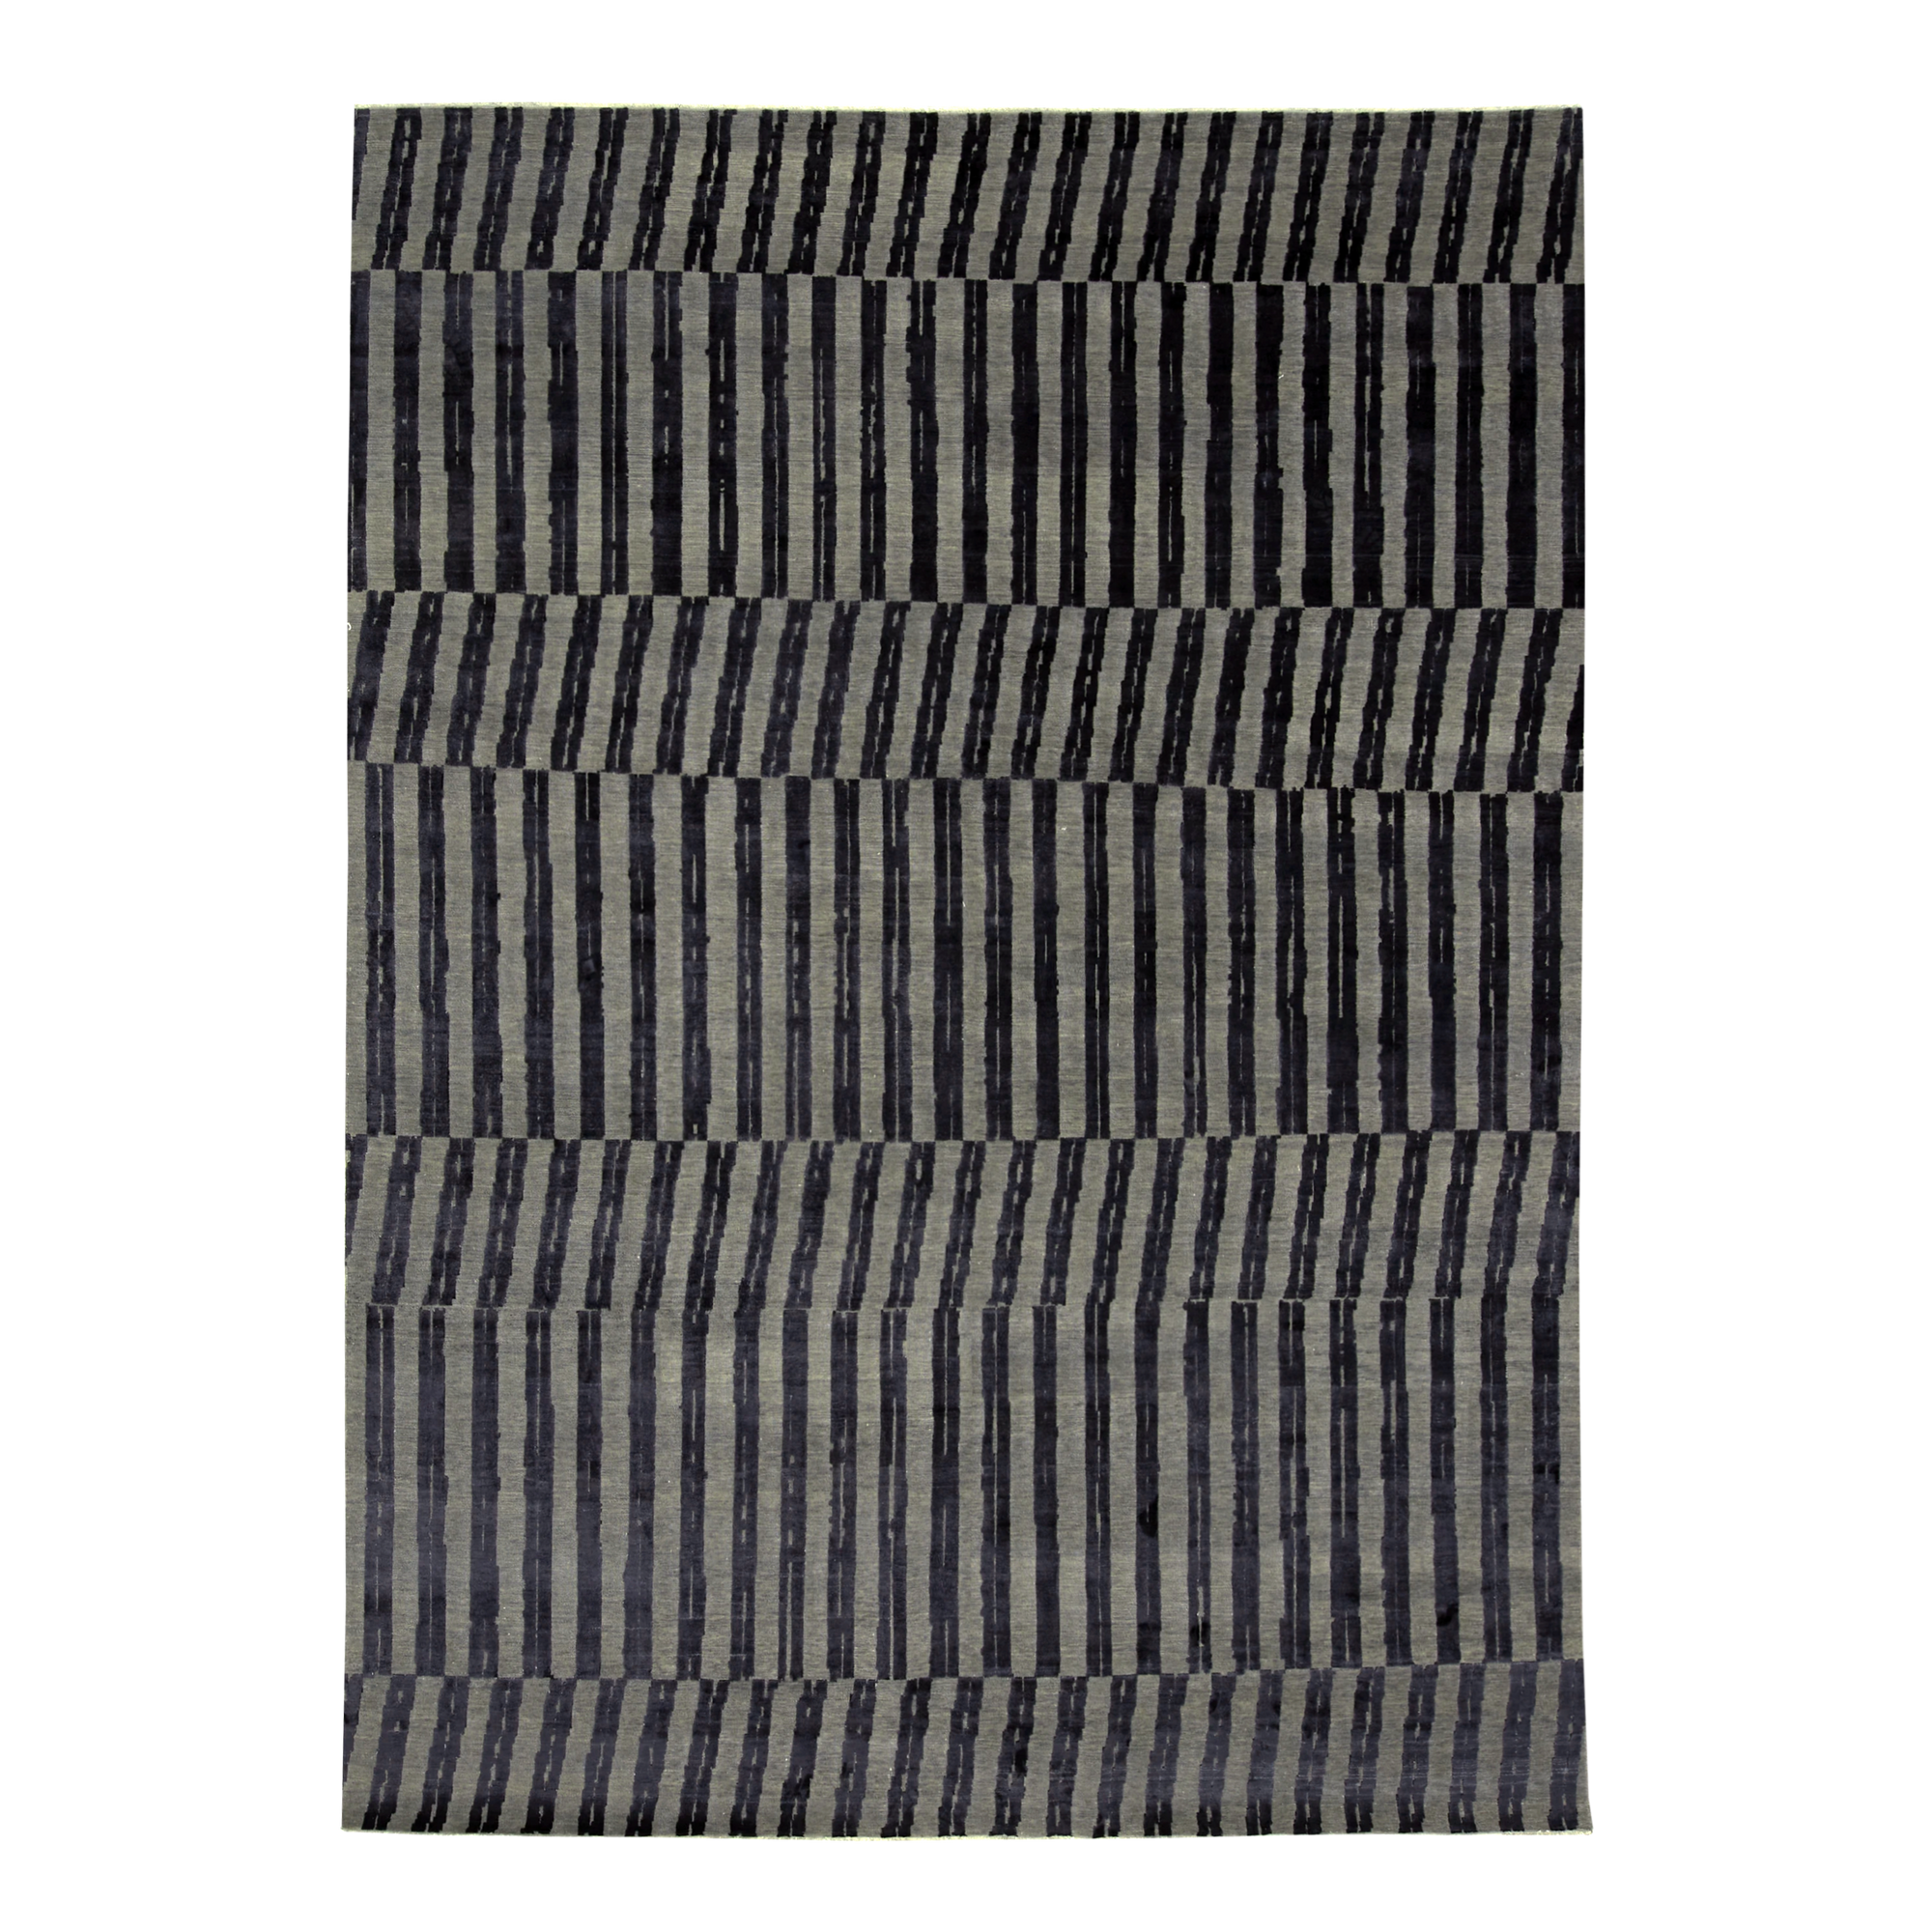 The Vienna Werkstätte Rug Collection honours the early 20th century alliance of artists and designers, known as Wiener Werkstätte, who sought to eliminate the boundary between cr